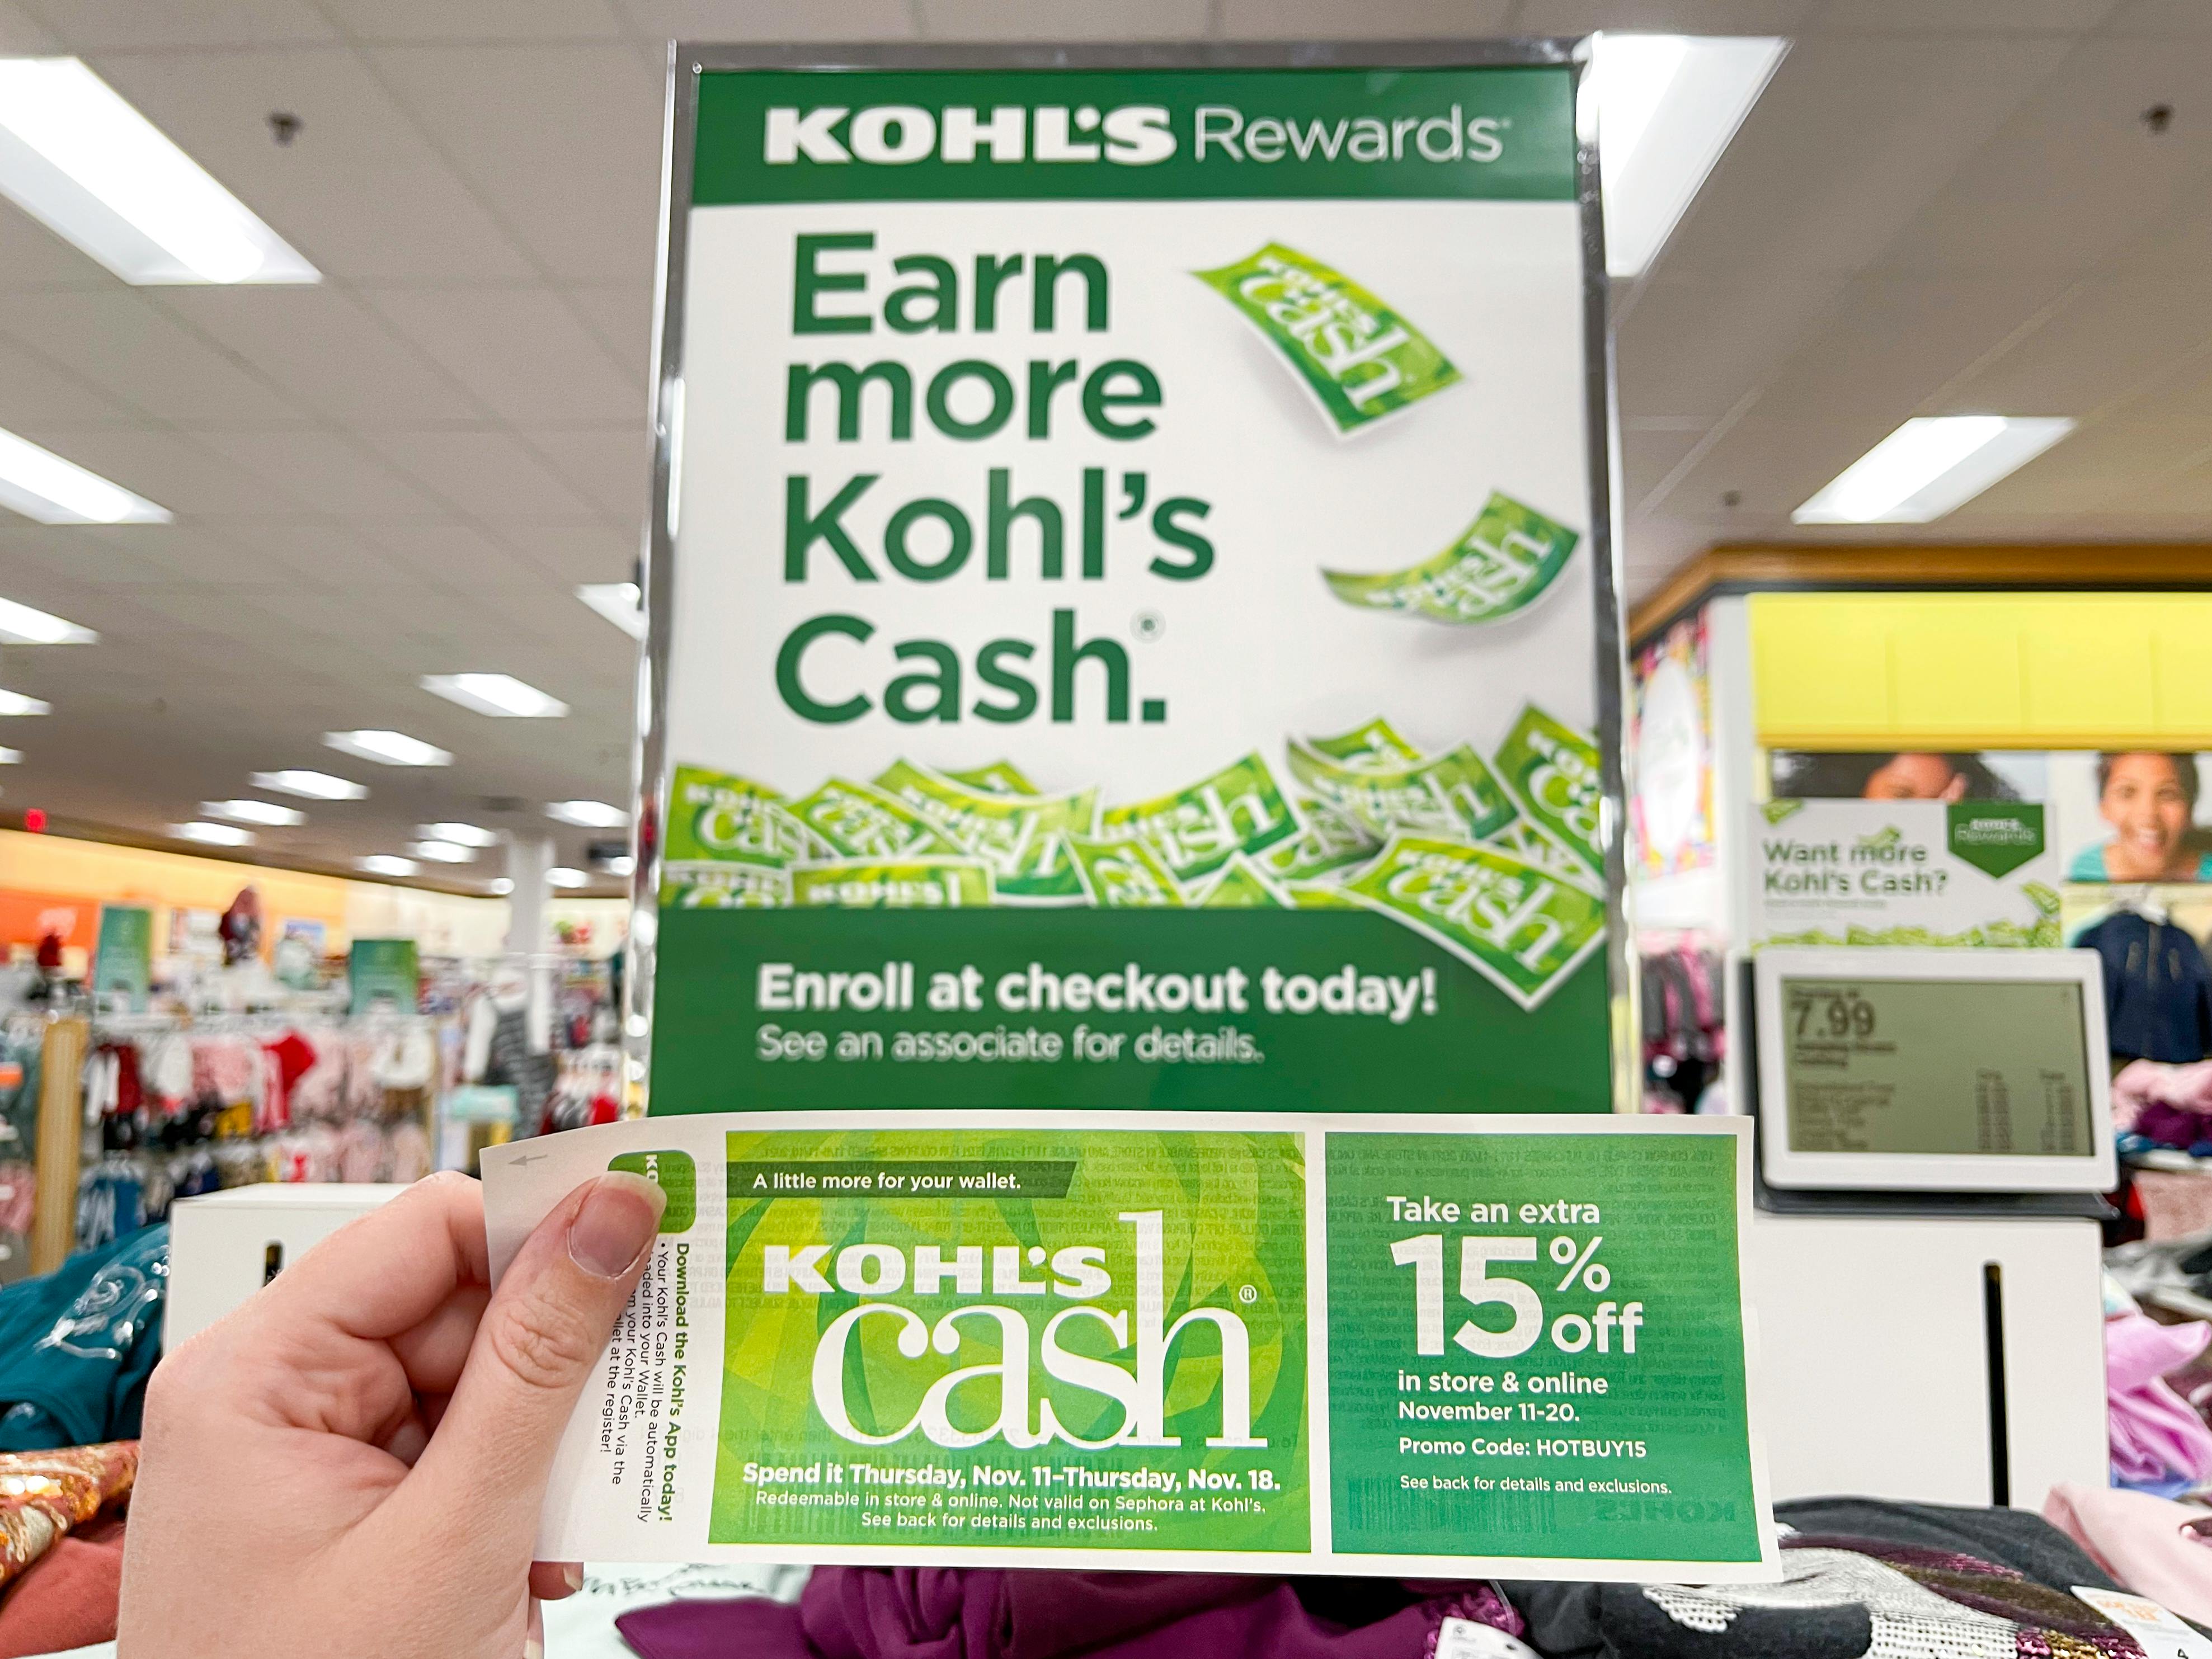 How does Kohl's Cash Work? Here are a few tips to earn more!